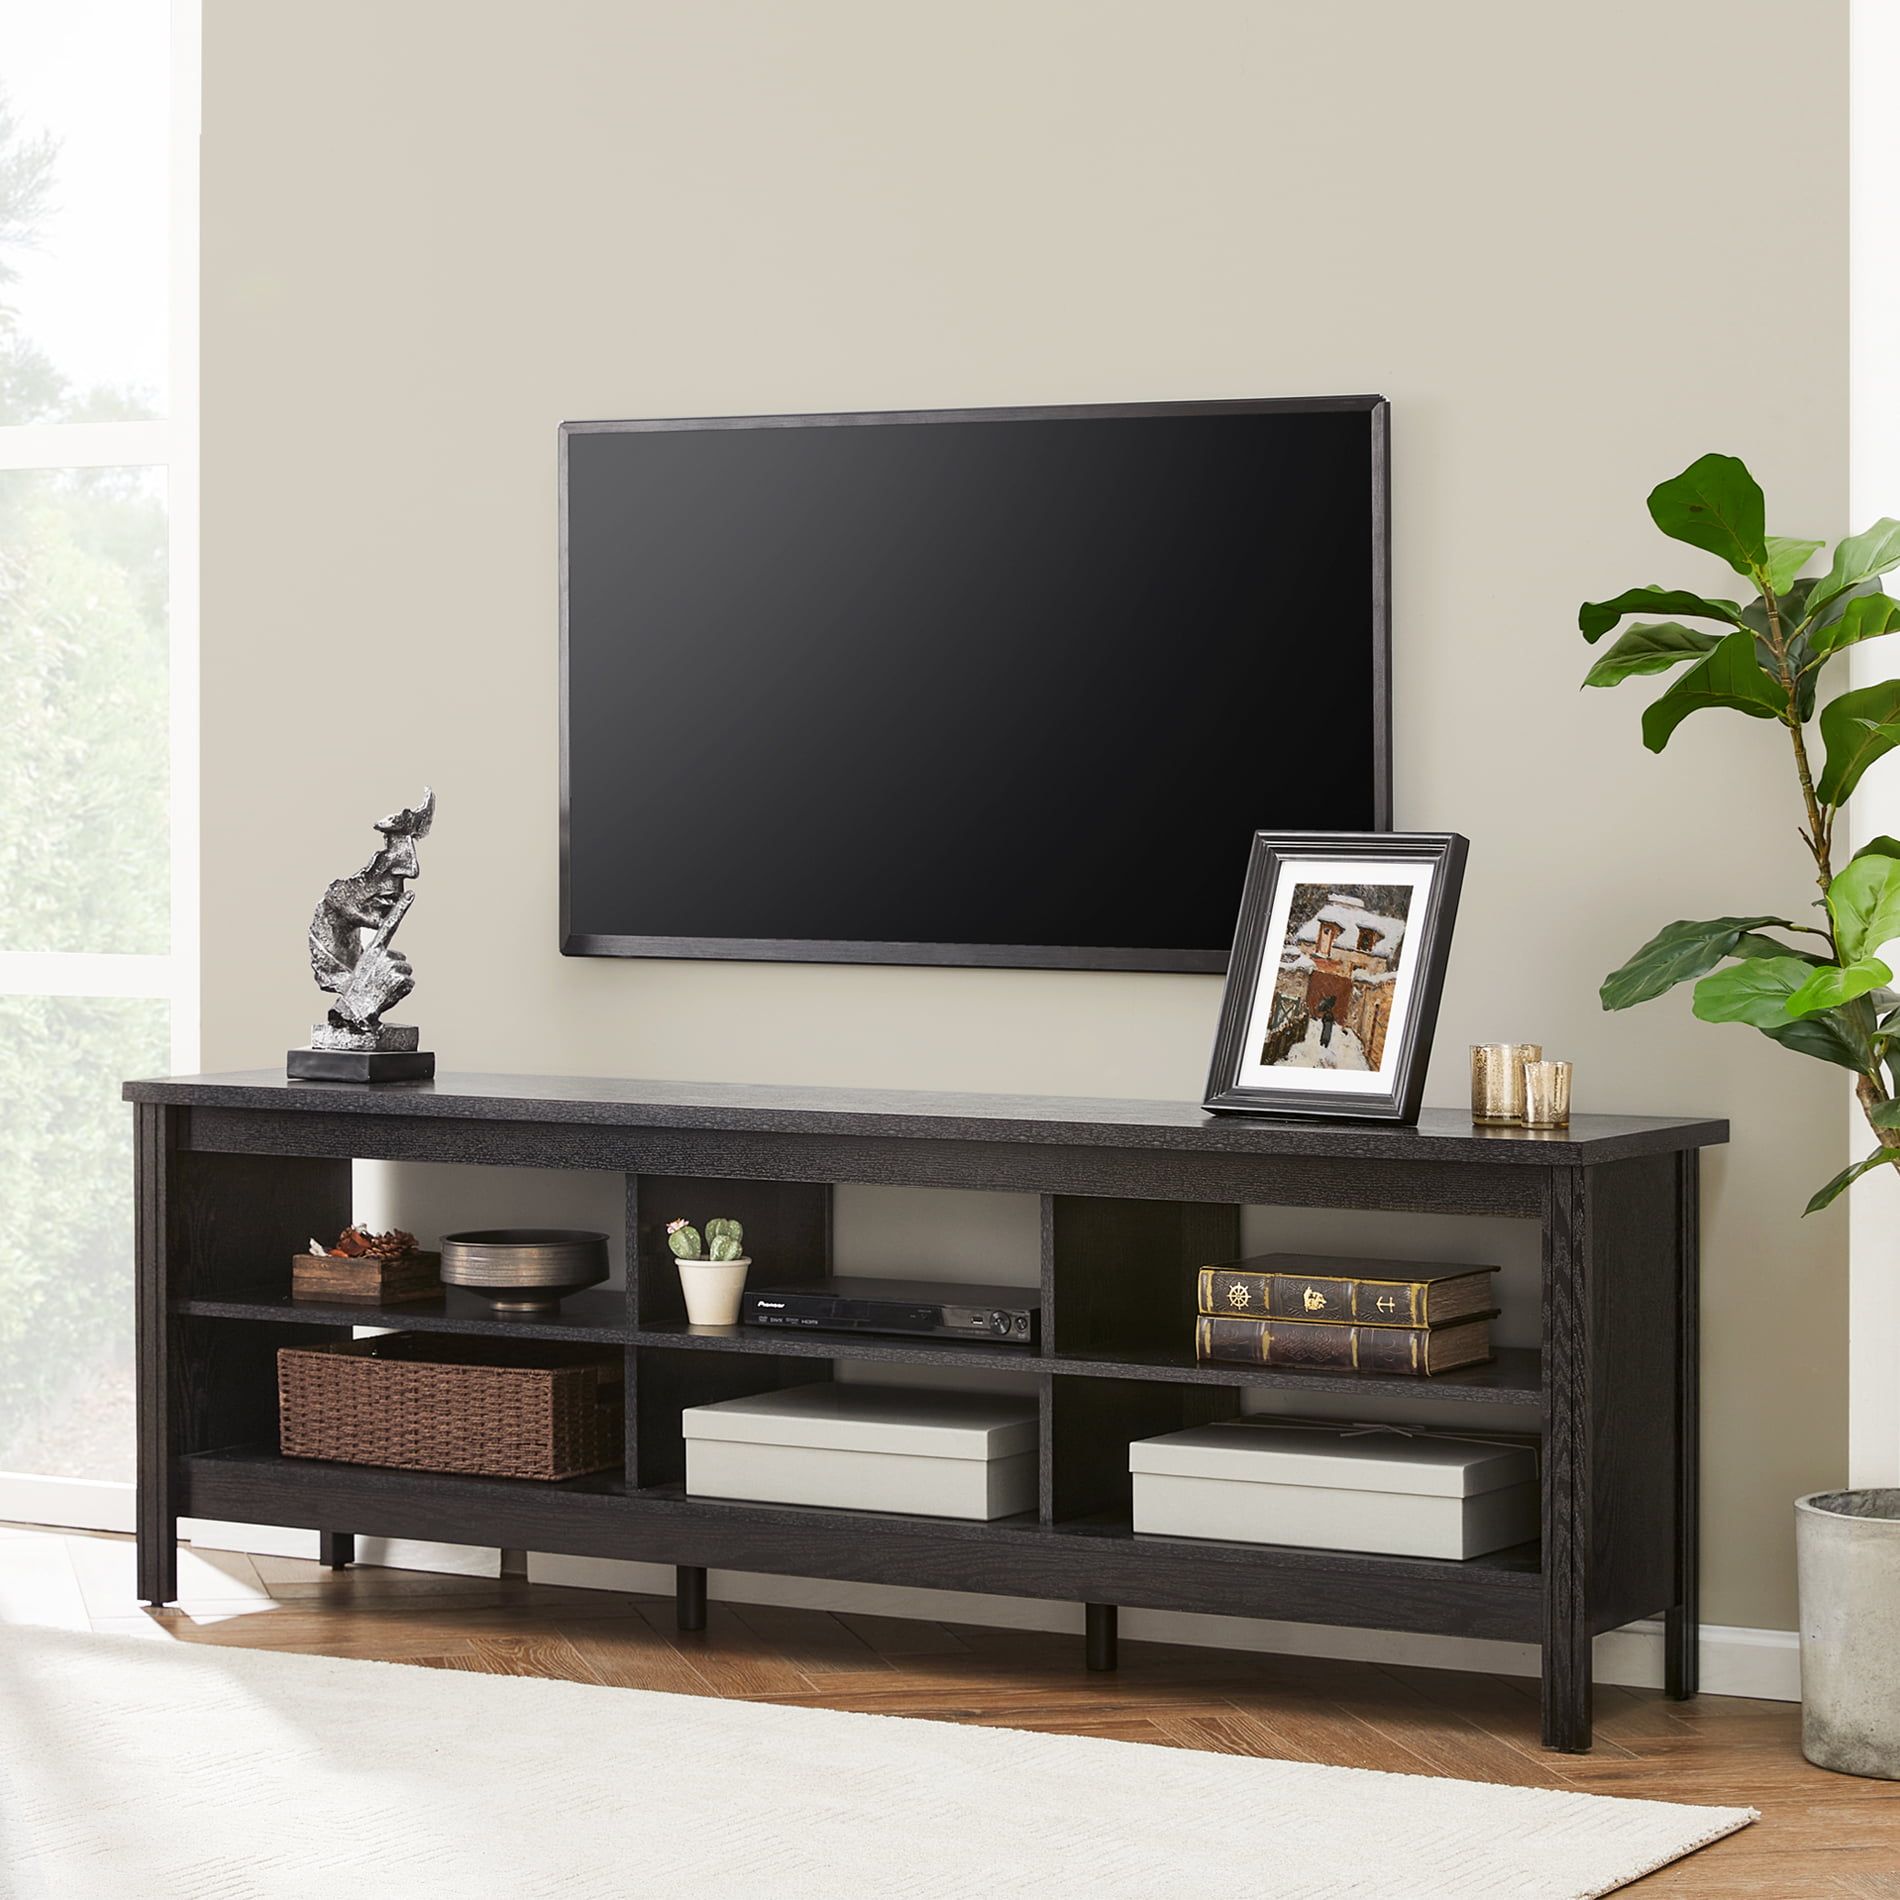 Farmhouse Tv Stands For 75 Inch Flat Screen Media Console Storage Throughout Entertainment Center With Storage Cabinet (Gallery 13 of 20)